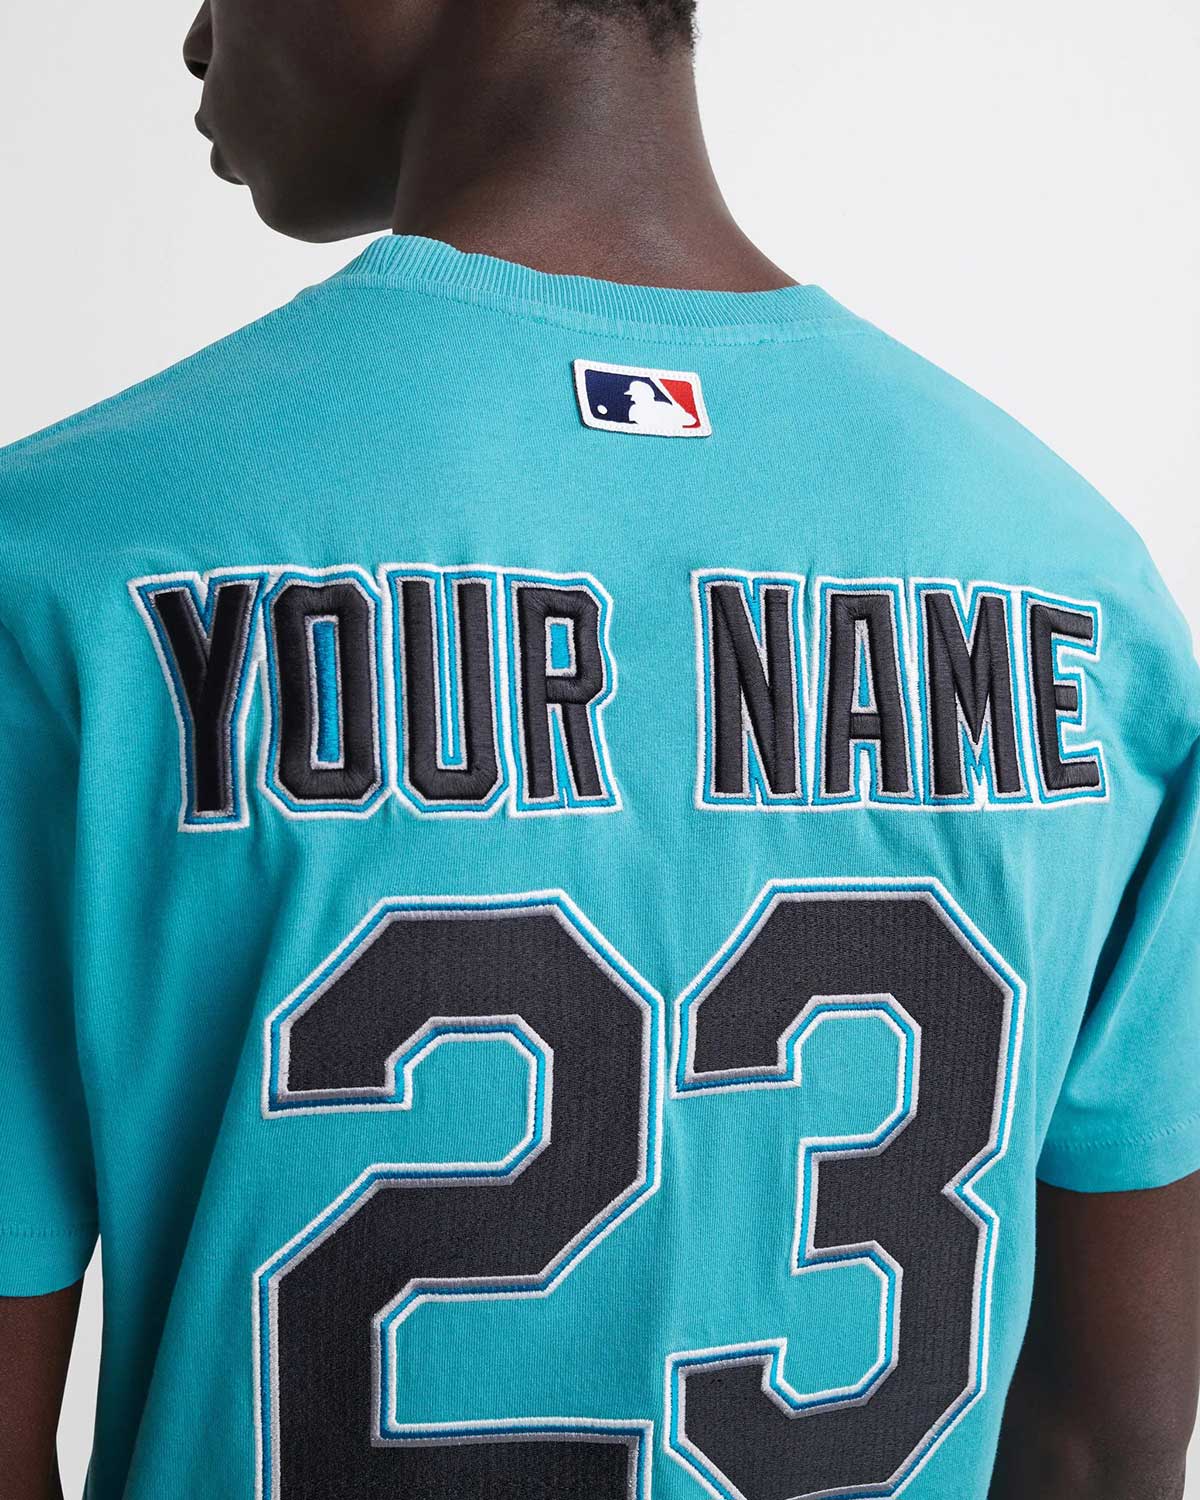 Off-White Is Making $1,100 Baseball Jerseys With Holes in Them